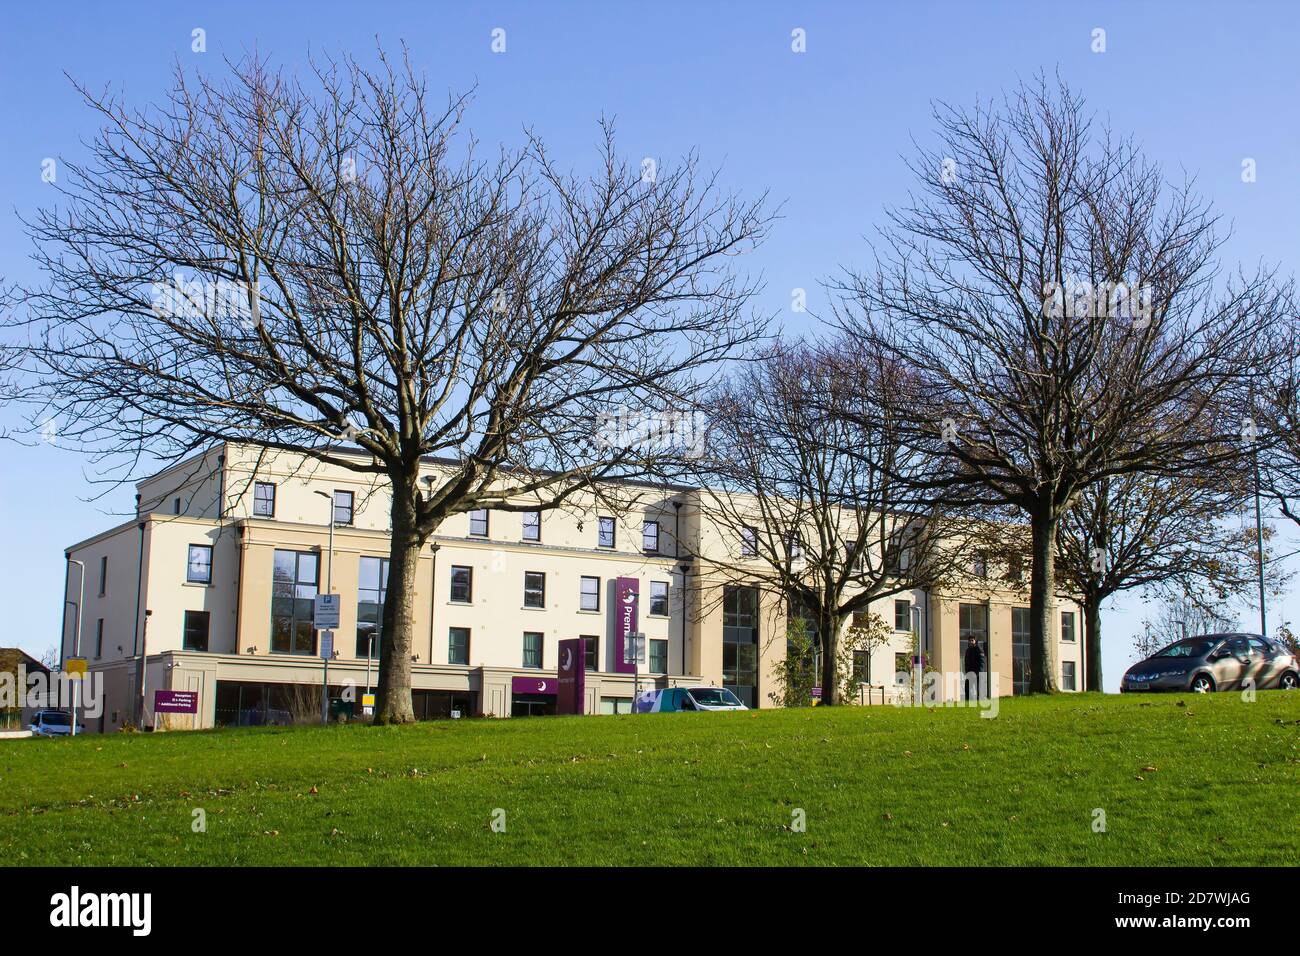 23 October 2020 The new Premier Inn hotel located close to the town hall on the edge of lovely Castle Park in Bangor County Down Northern Ireland. Stock Photo